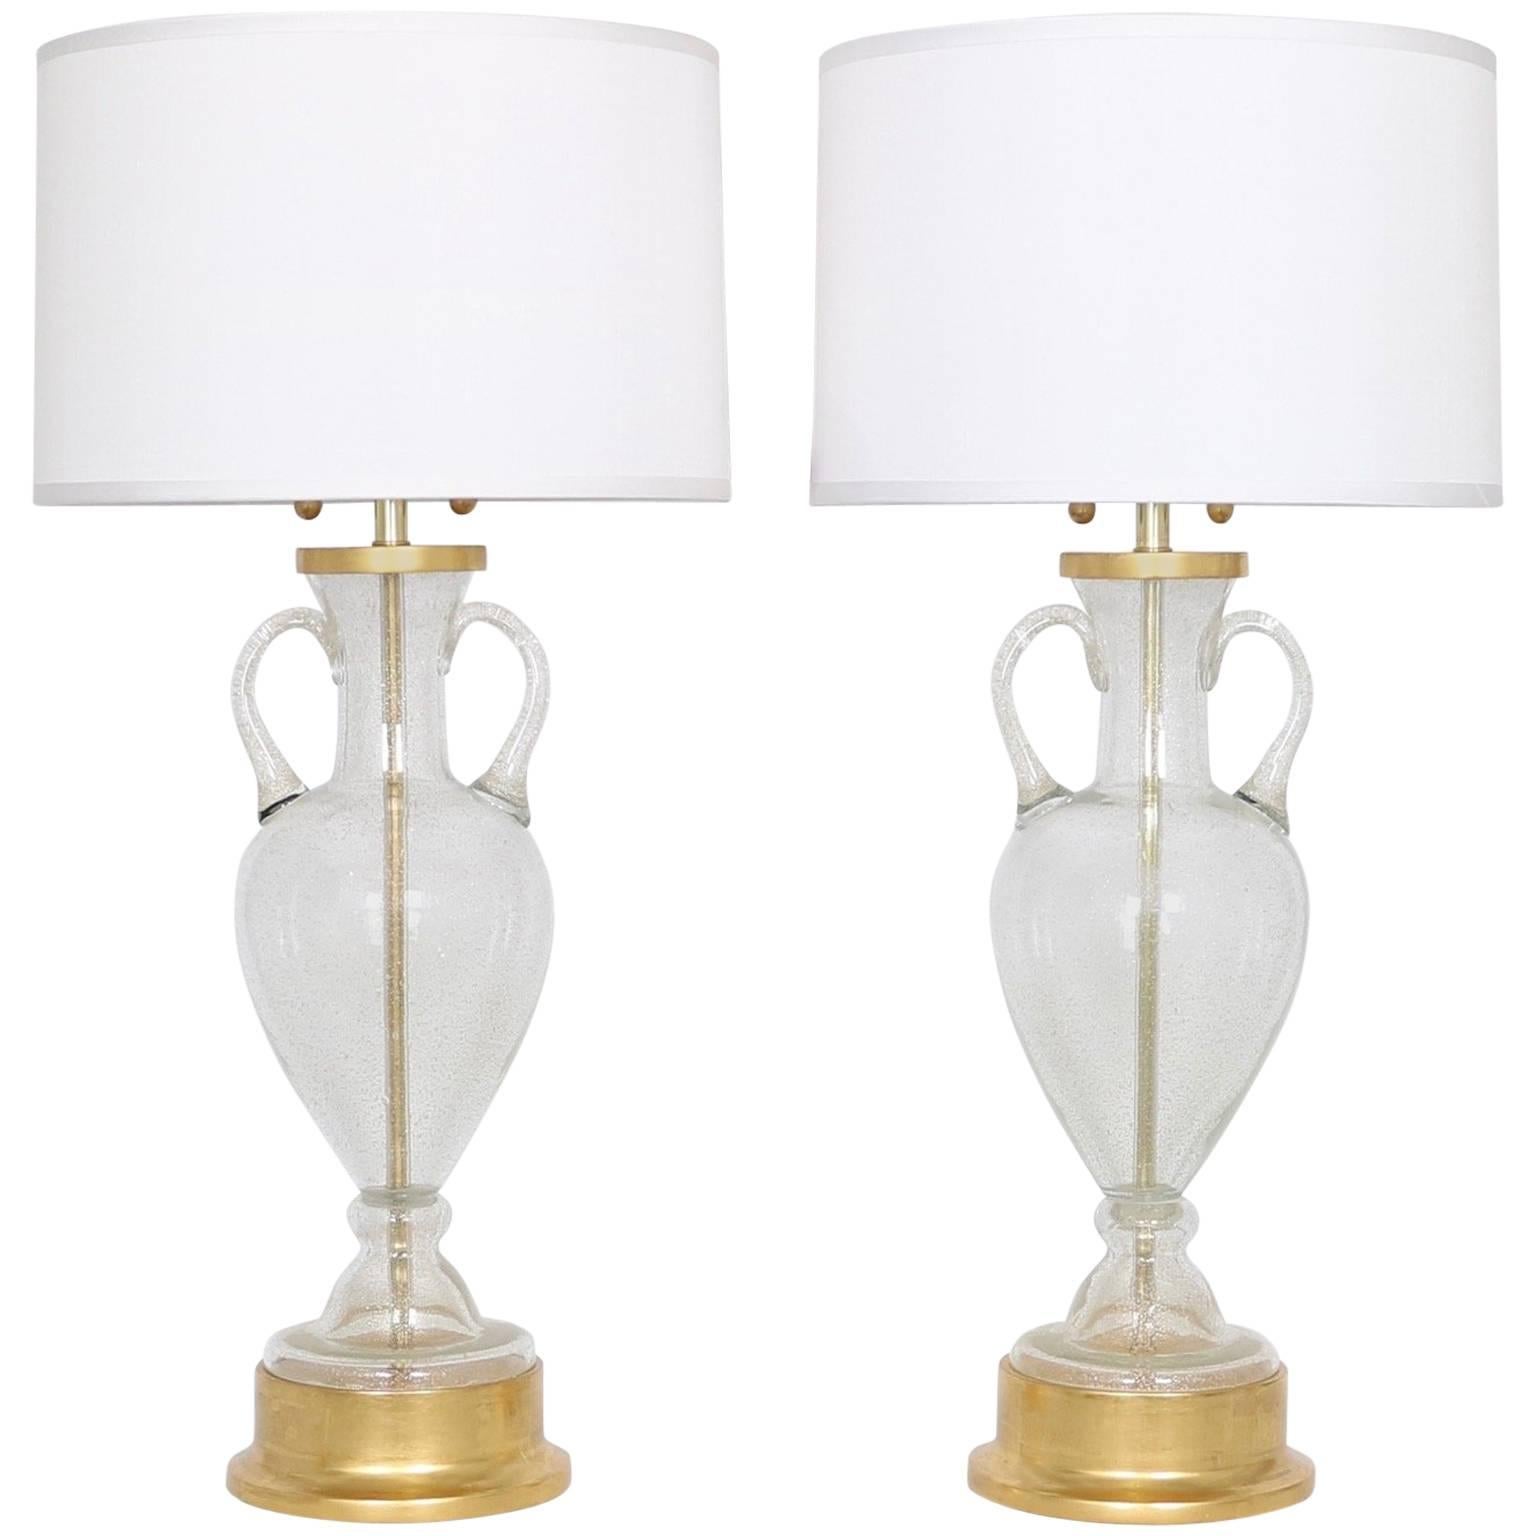 Murano Glass Urn Lamps by Seguso for Marbro, Pair